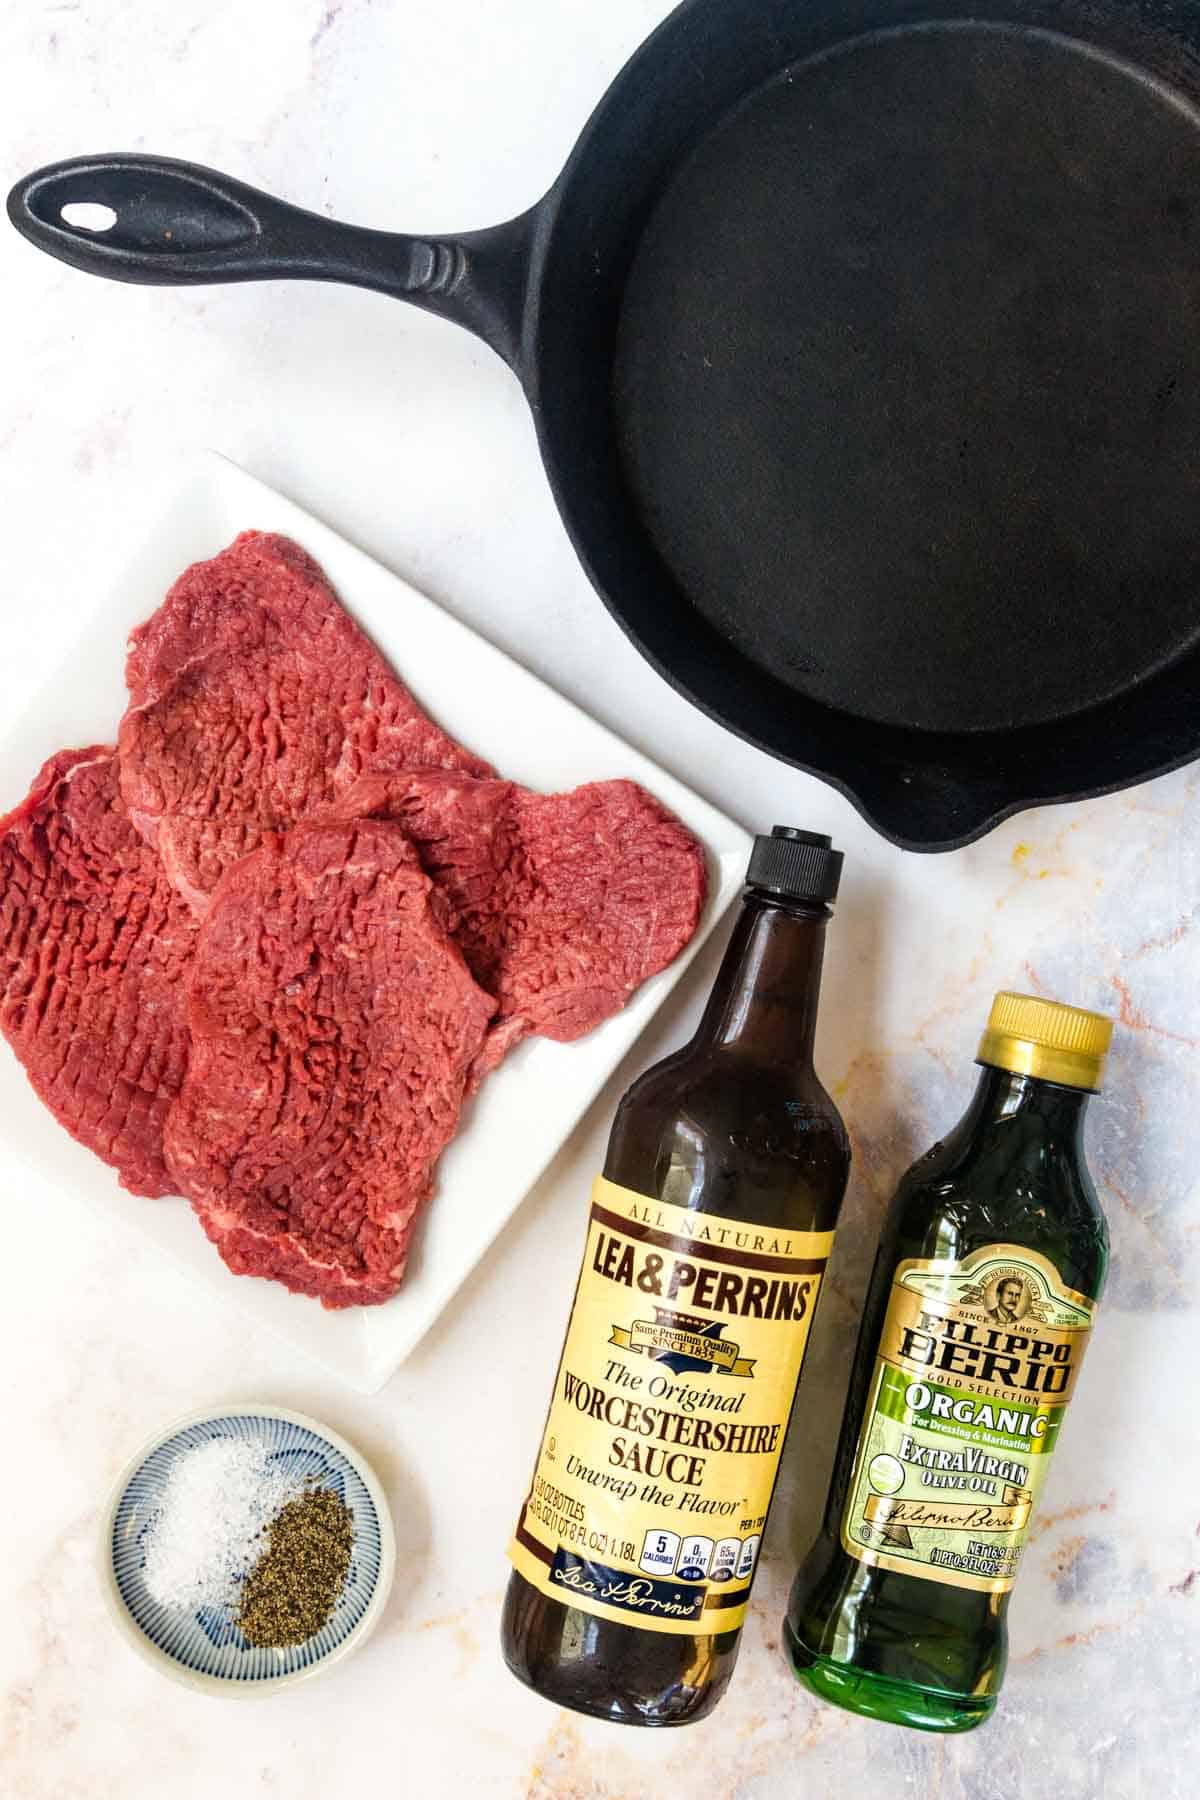 A cast iron skillet, uncooked cubed steaks, and other ingredients to make pan-seared cube steaks.